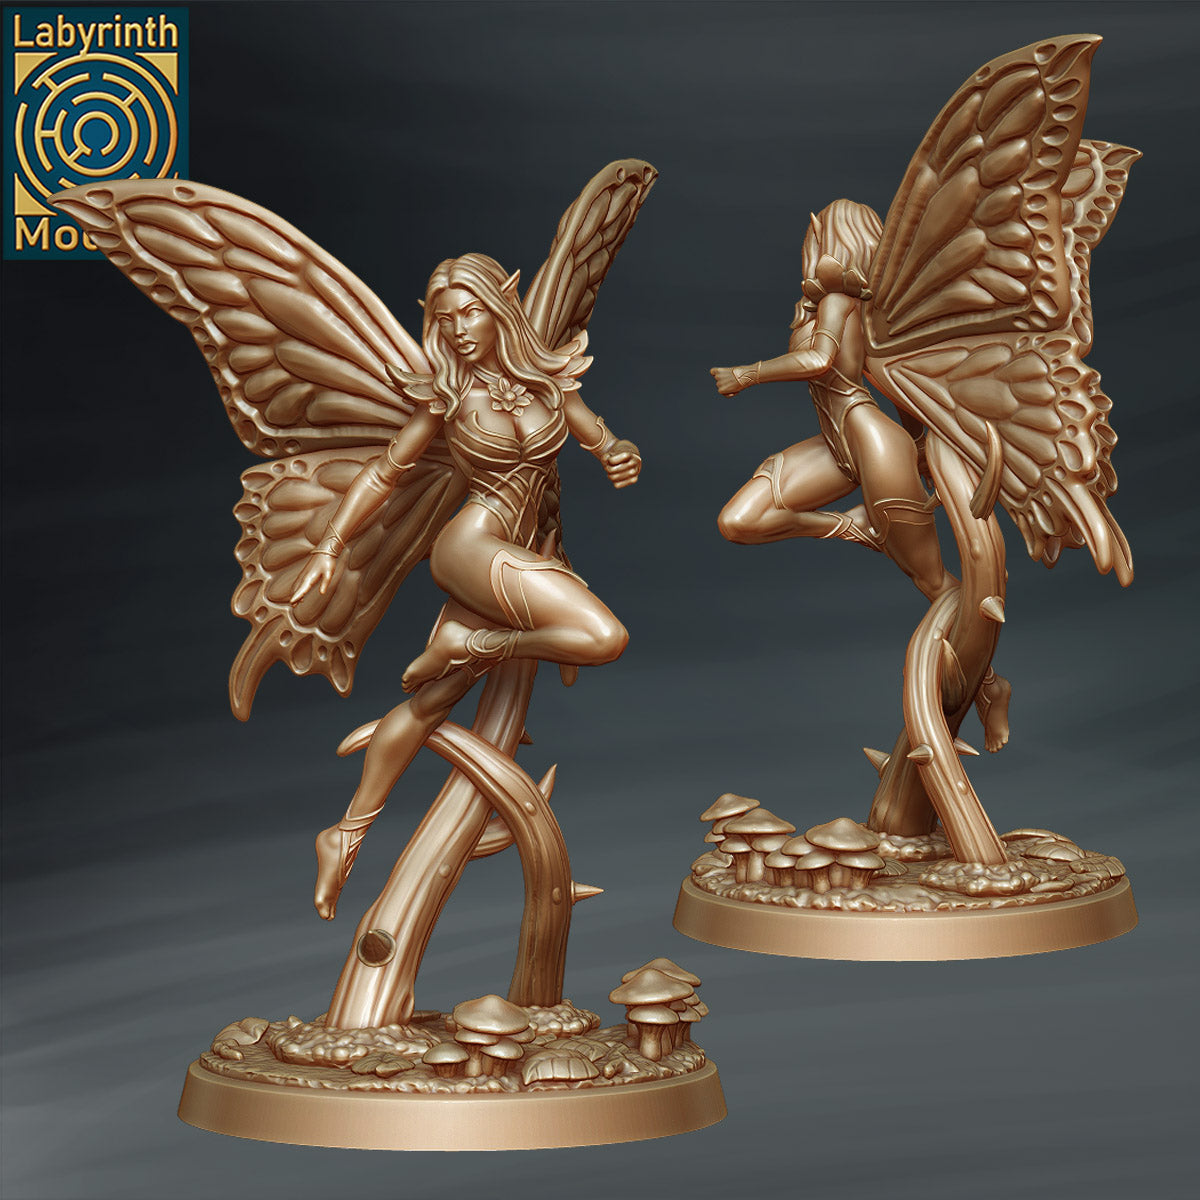 Faeries by Labyrinth Models